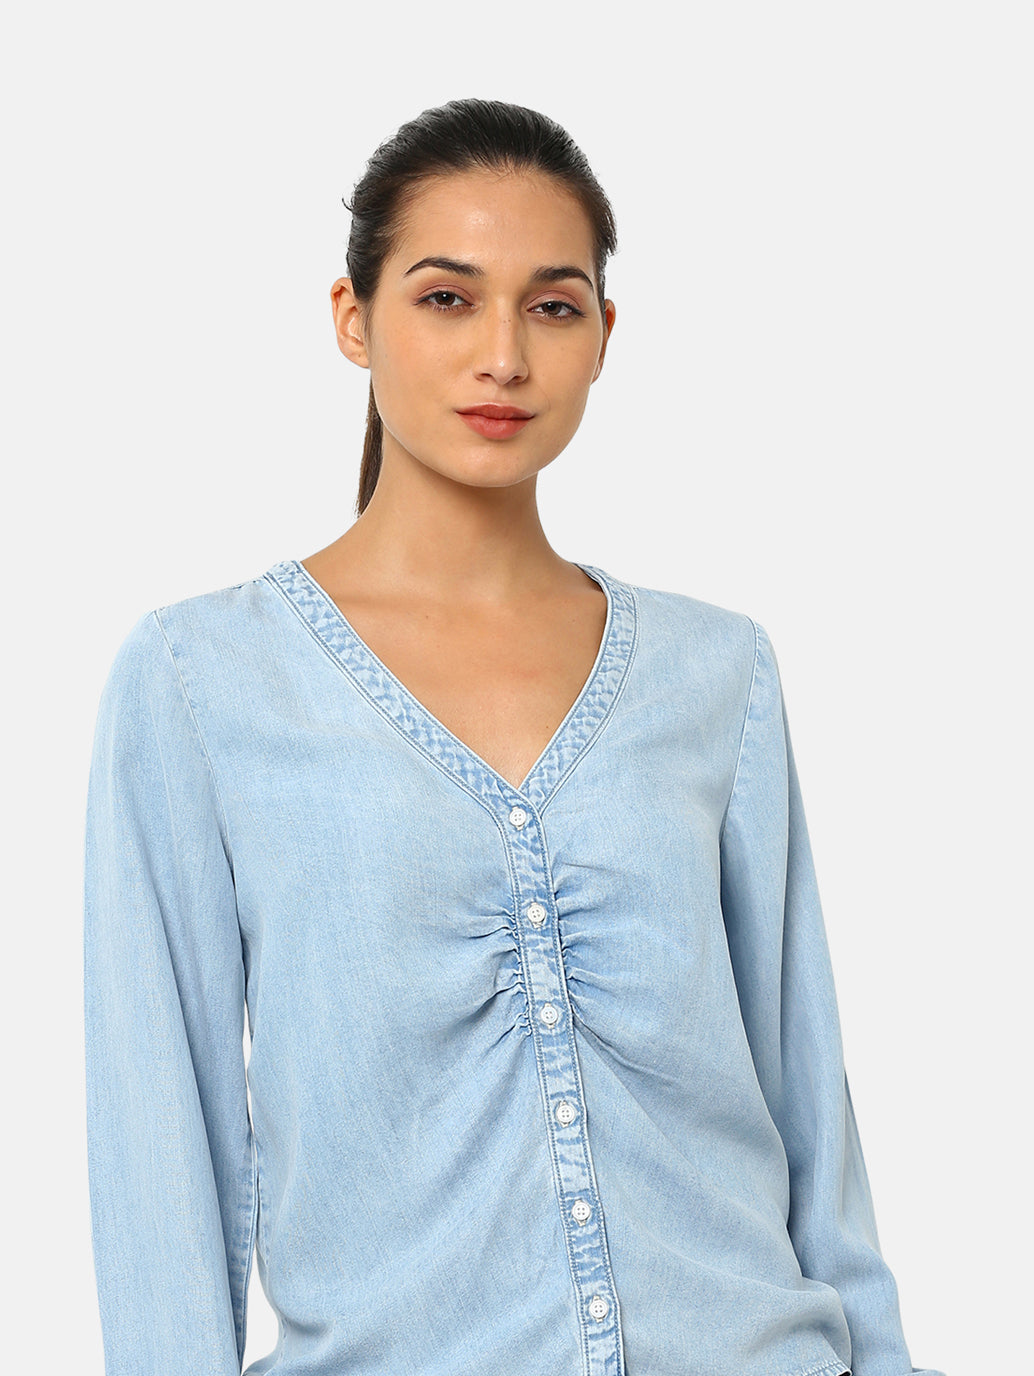 Women's Solid Blue V Neck Lace Top